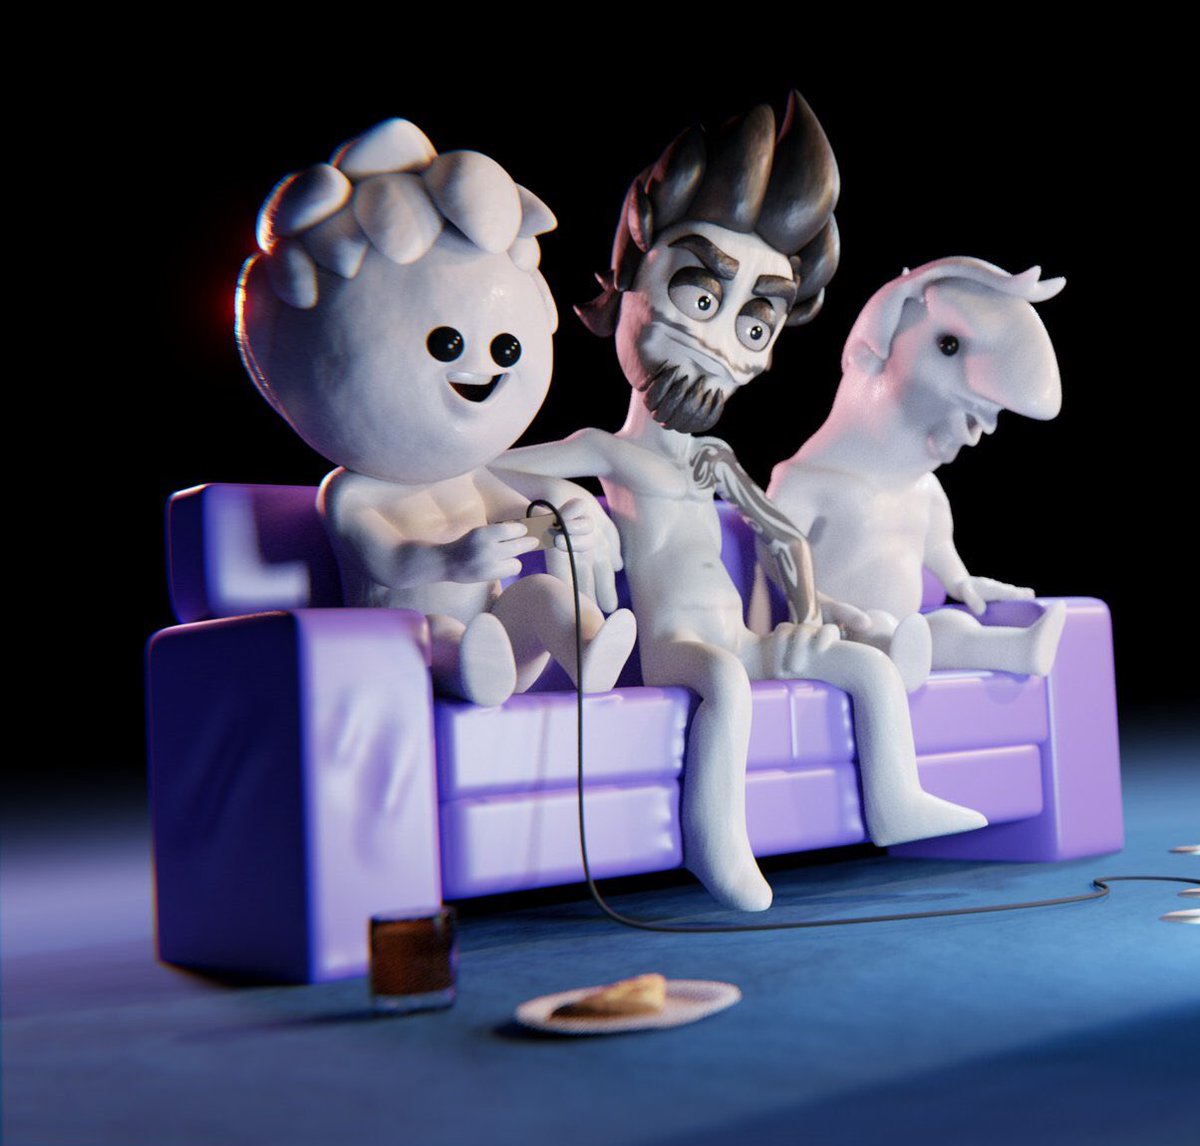 OneyPlays (No real photos available)